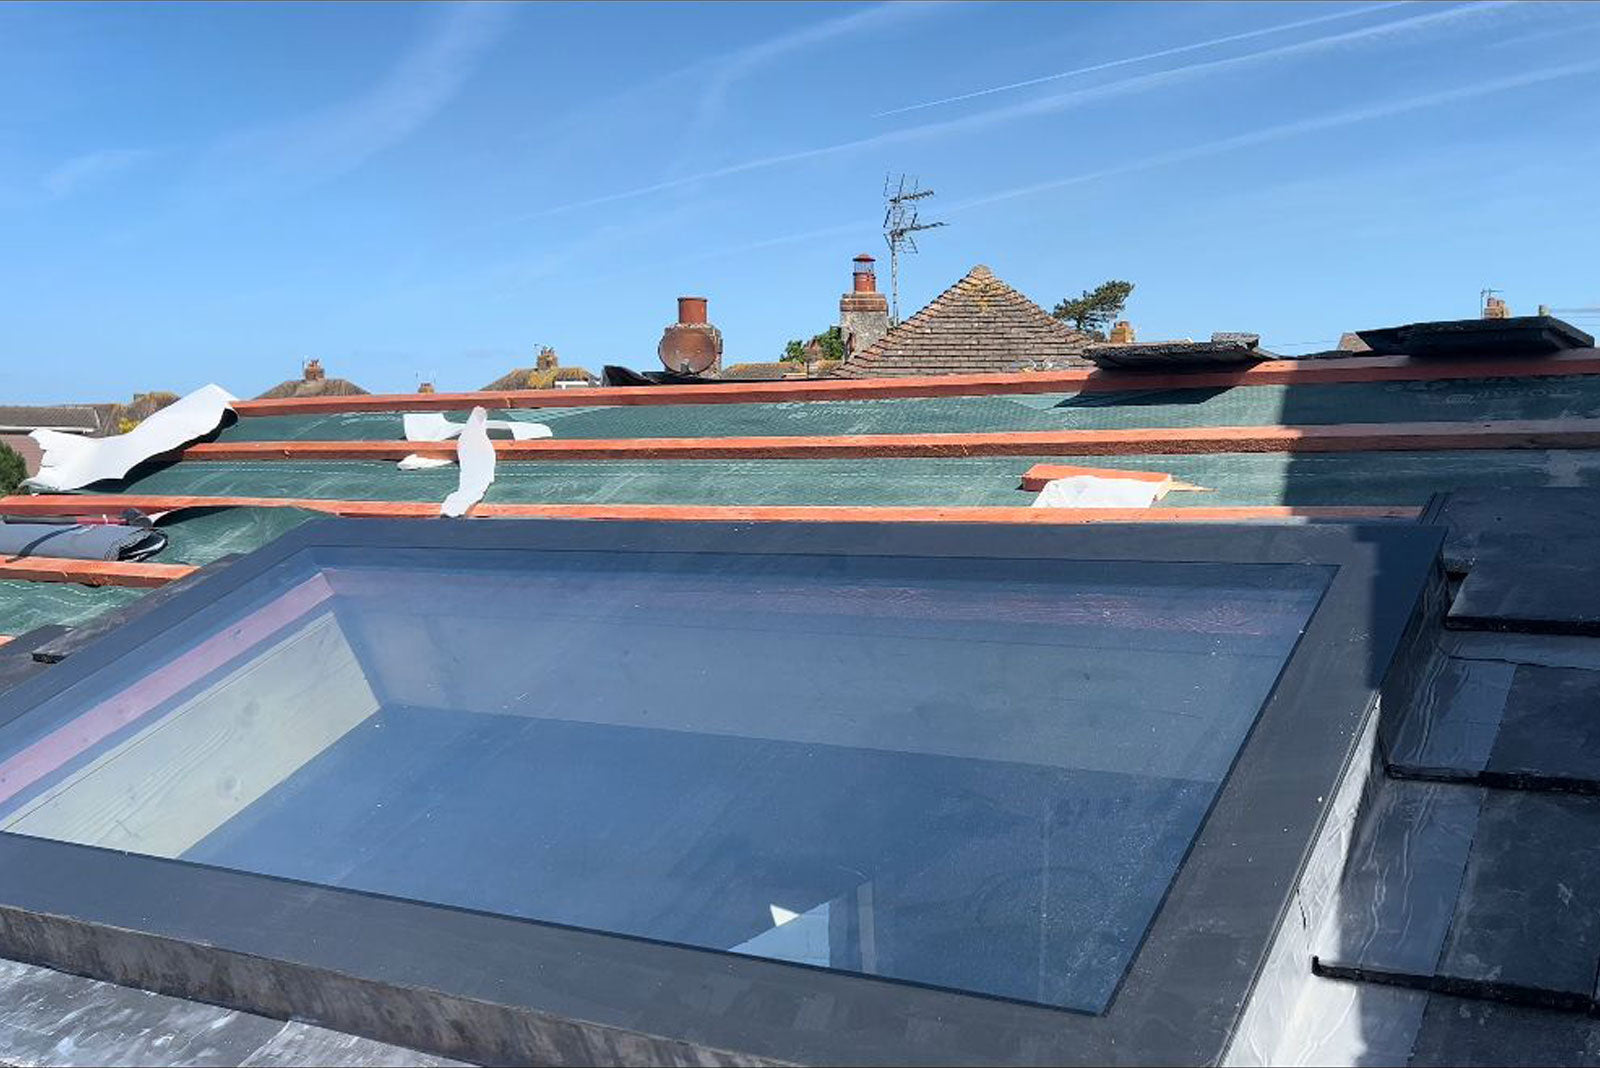 Pitched Roof Skylight 600 x 1500mm